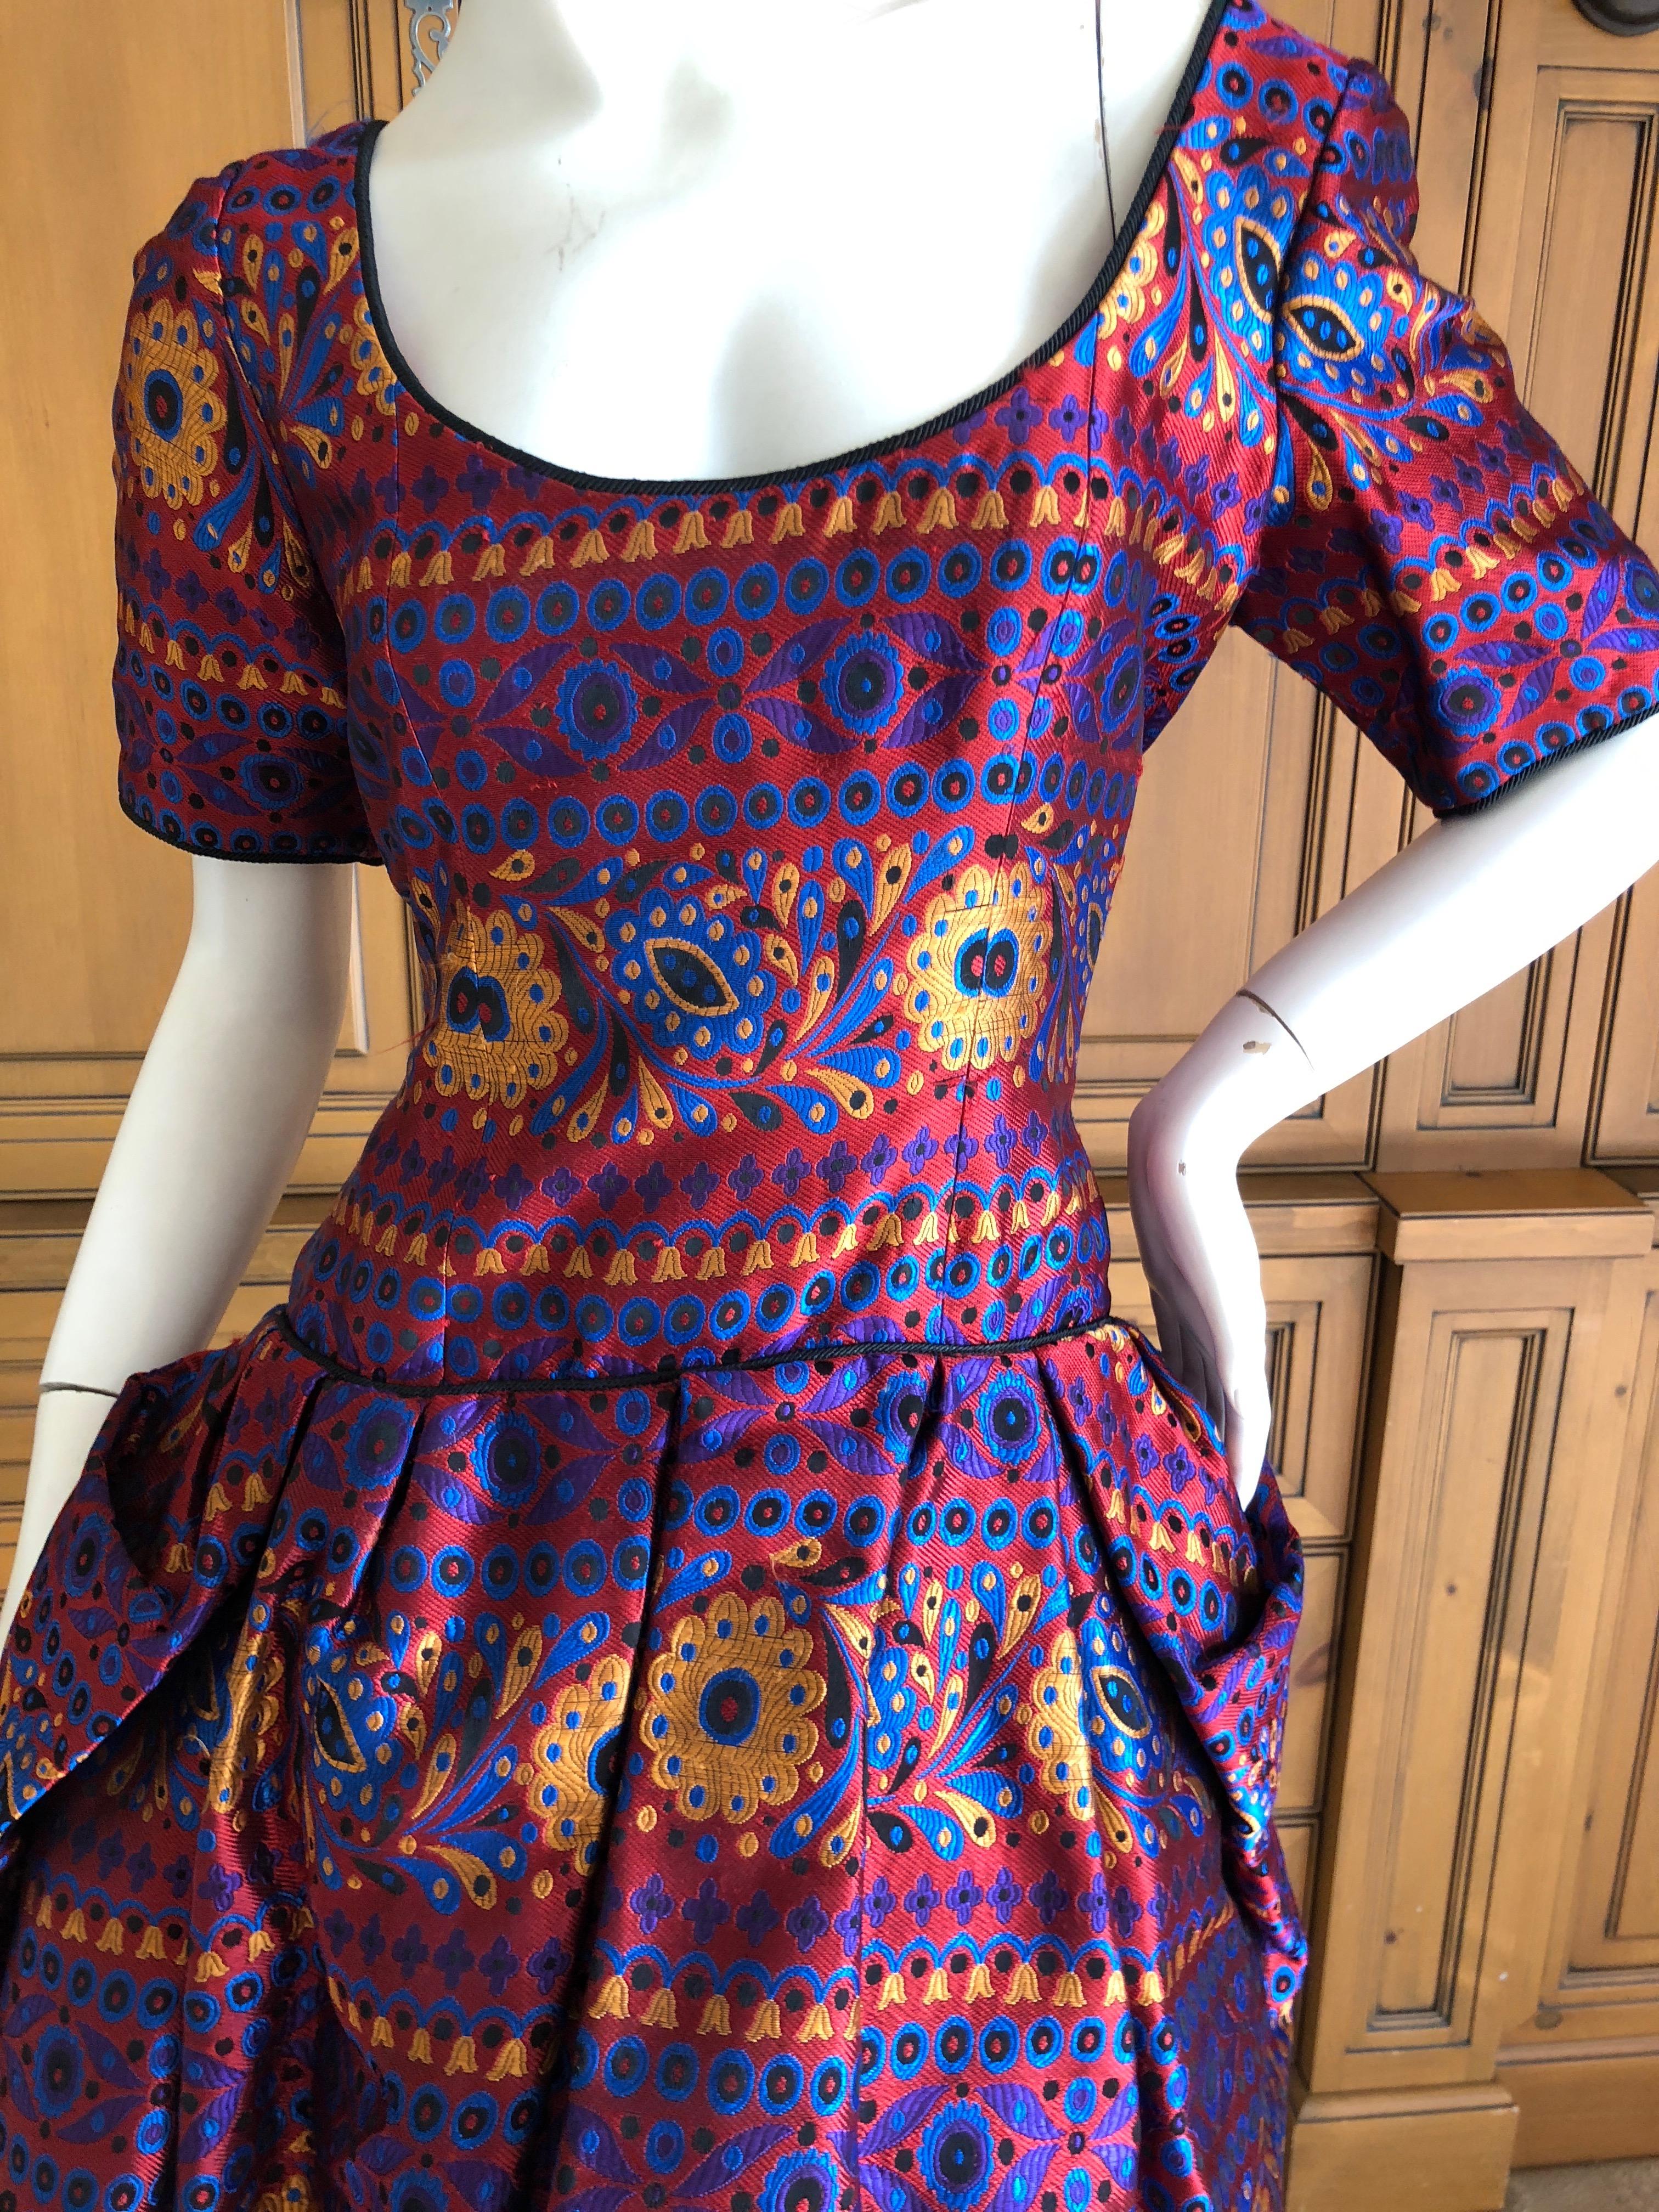 Yves Saint Laurent Rive Gauche '79 Colorful Brocade Bustle Back Cocktail Dress  In Excellent Condition For Sale In Cloverdale, CA